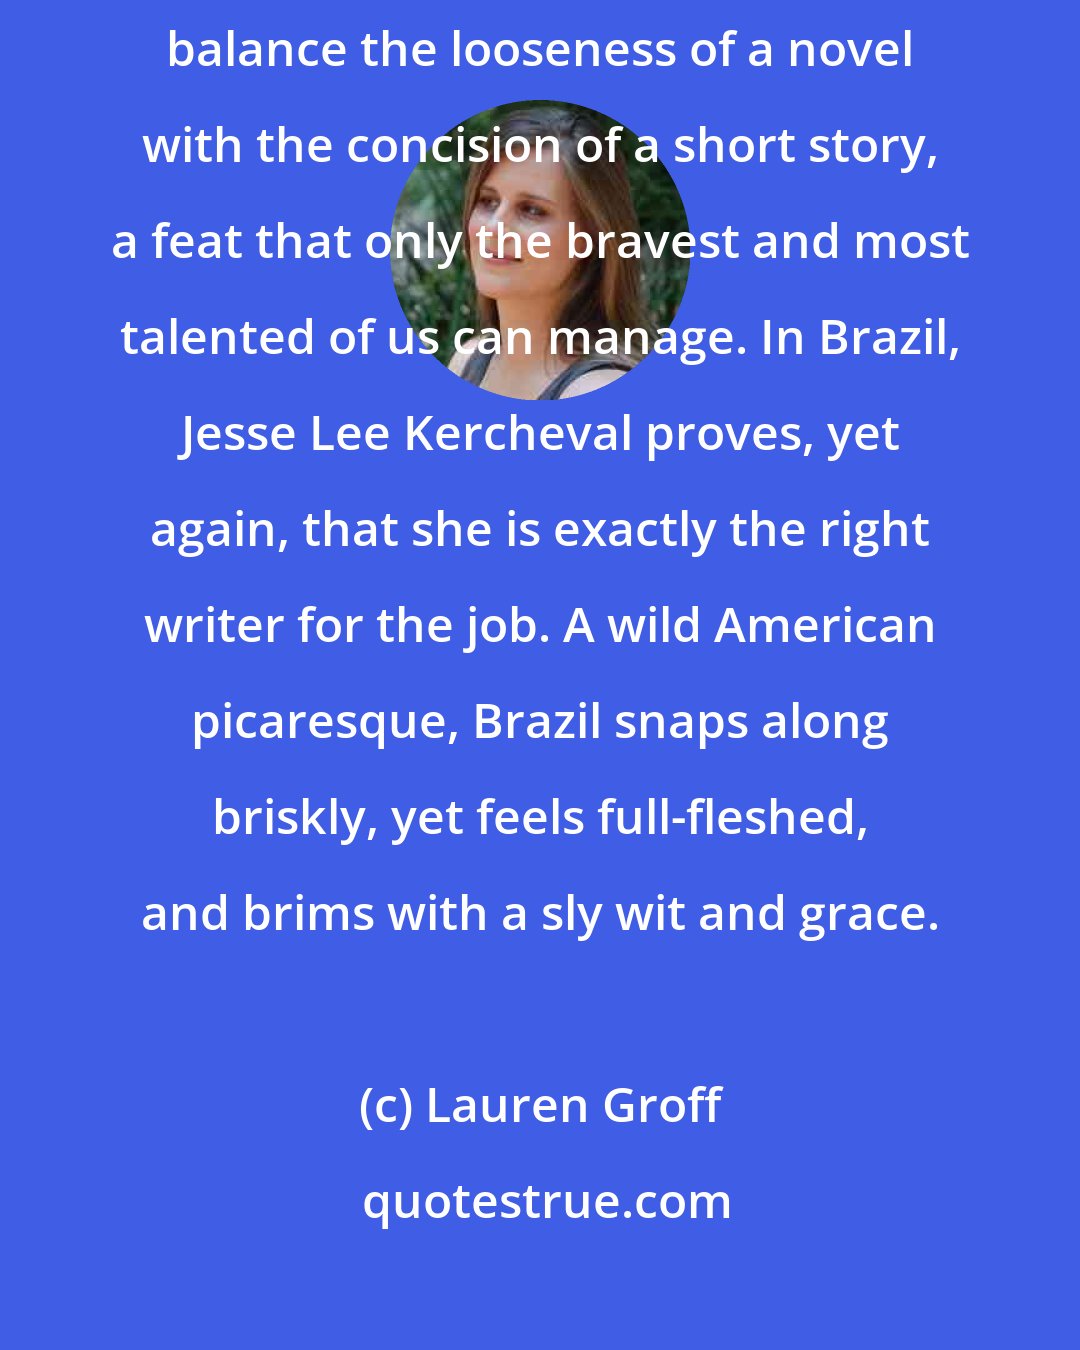 Lauren Groff: The novella is at once the most elegant and demanding form: a writer must balance the looseness of a novel with the concision of a short story, a feat that only the bravest and most talented of us can manage. In Brazil, Jesse Lee Kercheval proves, yet again, that she is exactly the right writer for the job. A wild American picaresque, Brazil snaps along briskly, yet feels full-fleshed, and brims with a sly wit and grace.